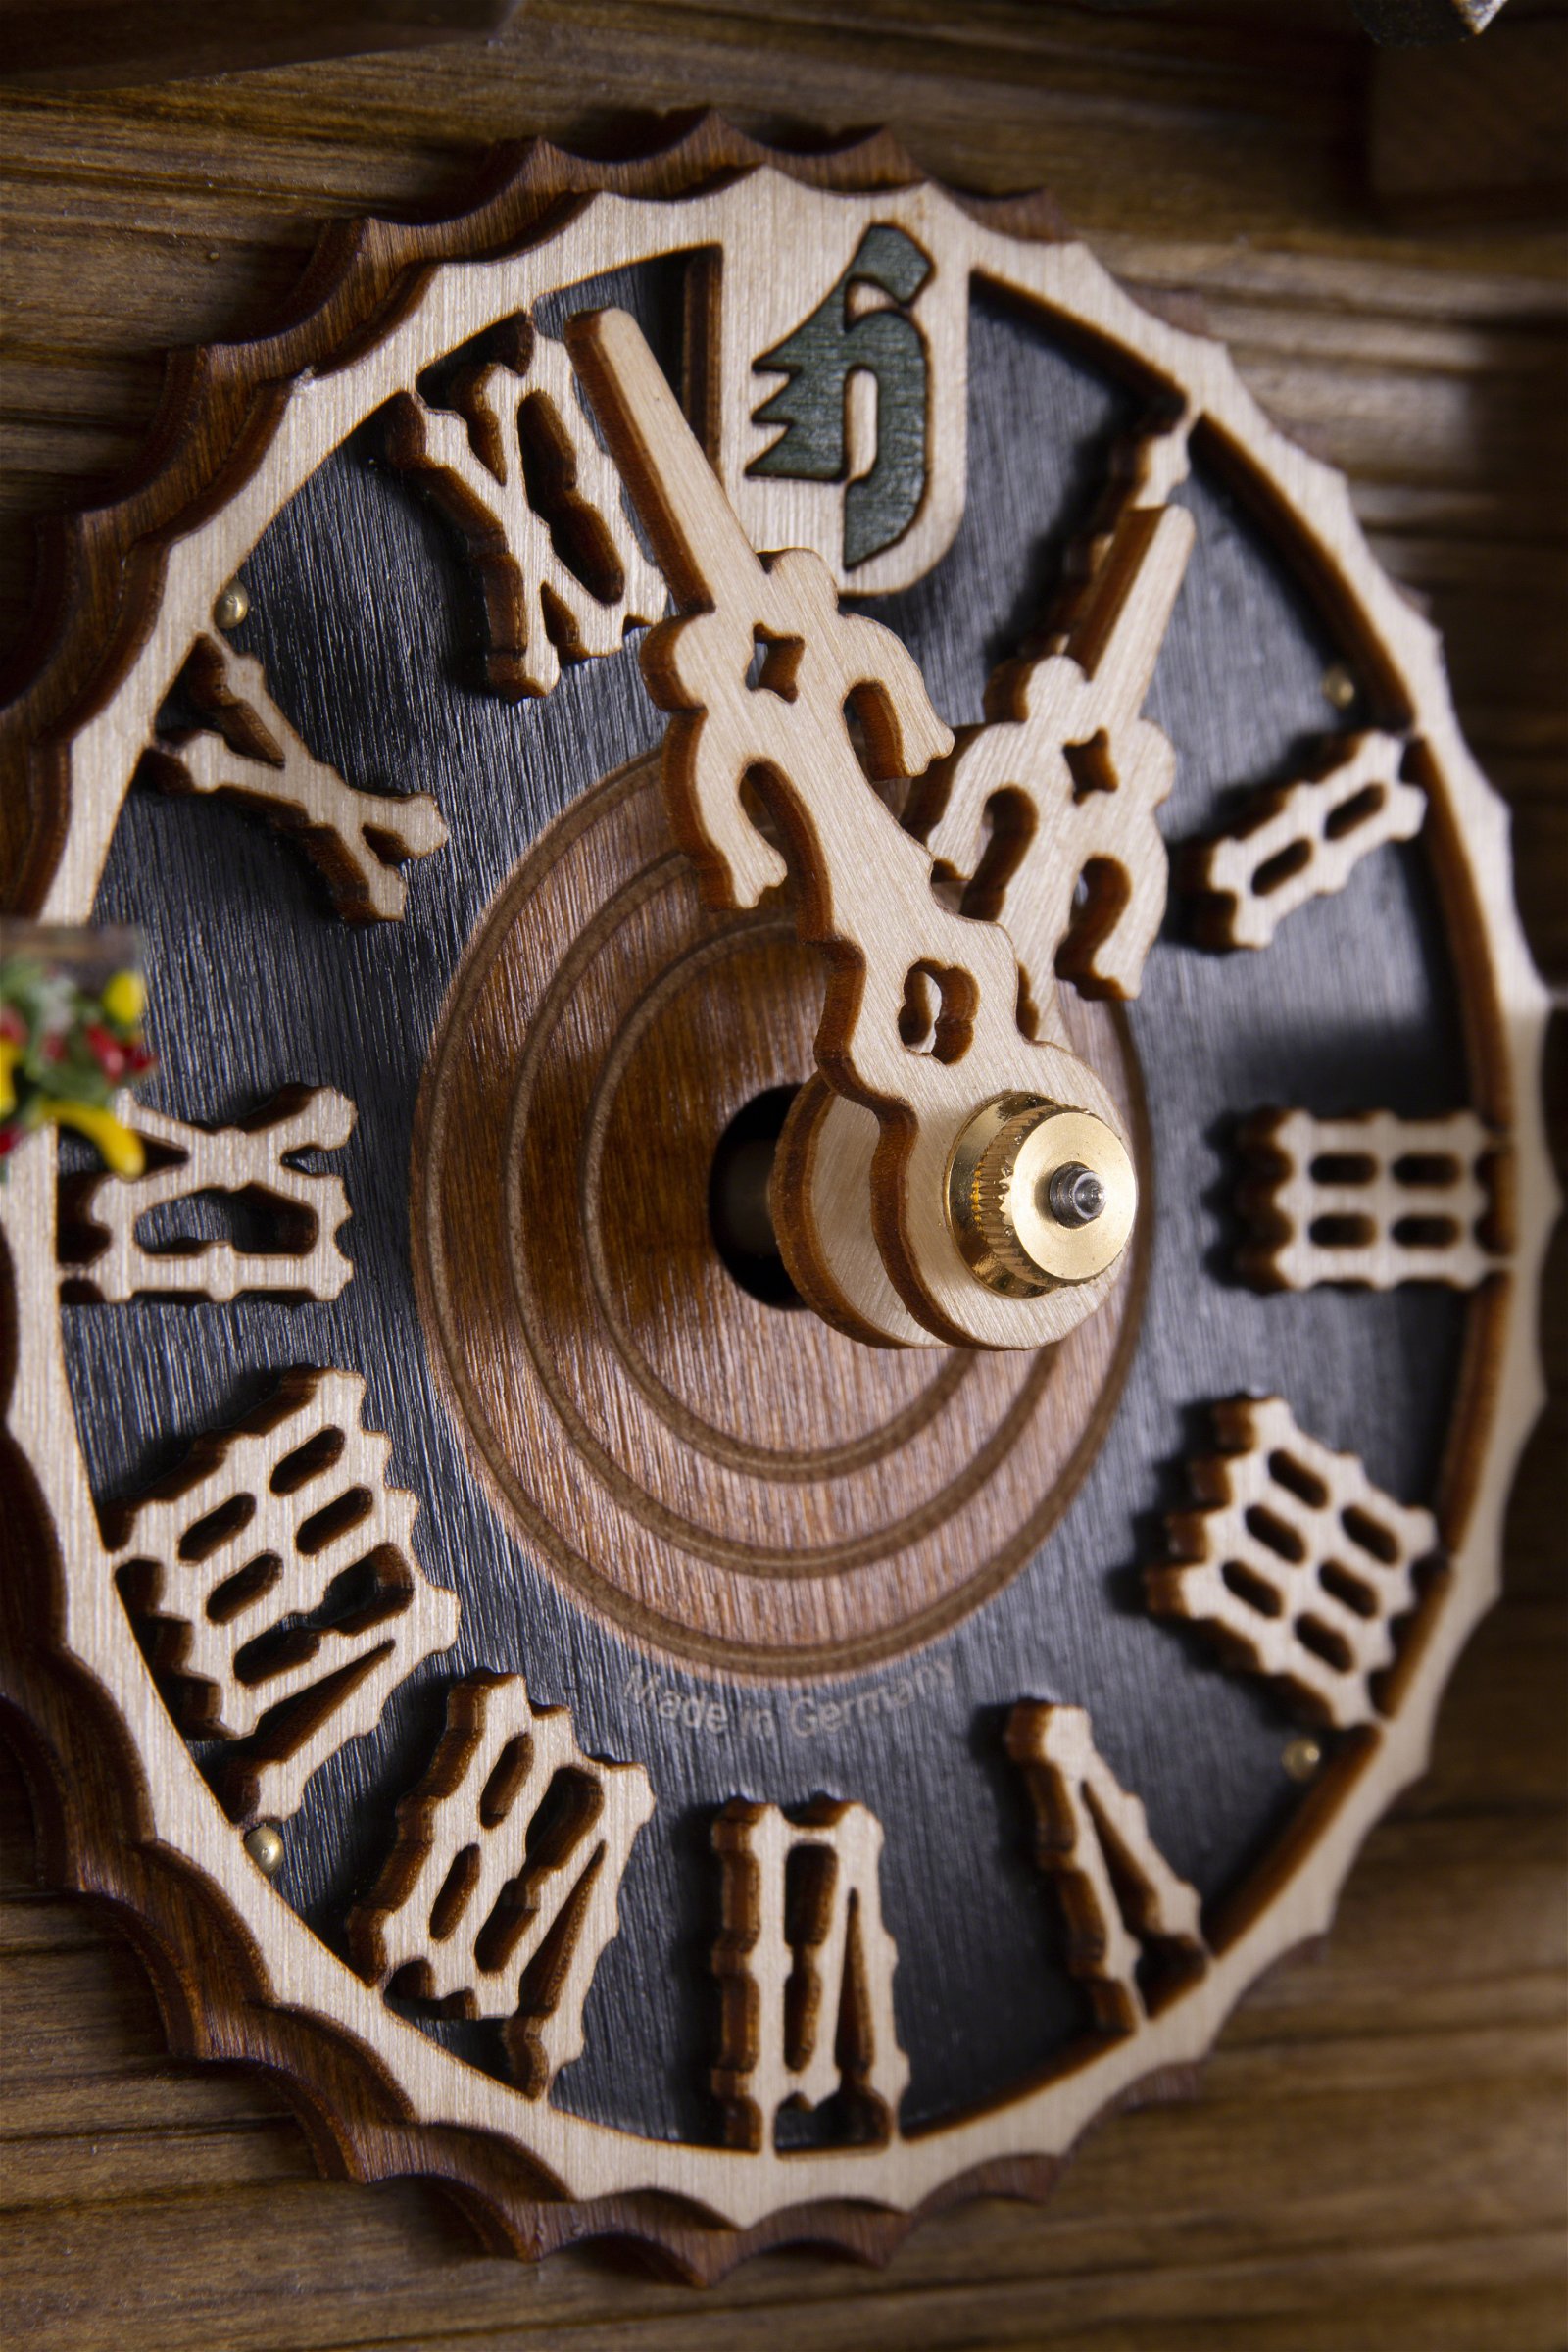 Cuckoo Clock 8-day-movement Chalet-Style 52cm by Hönes